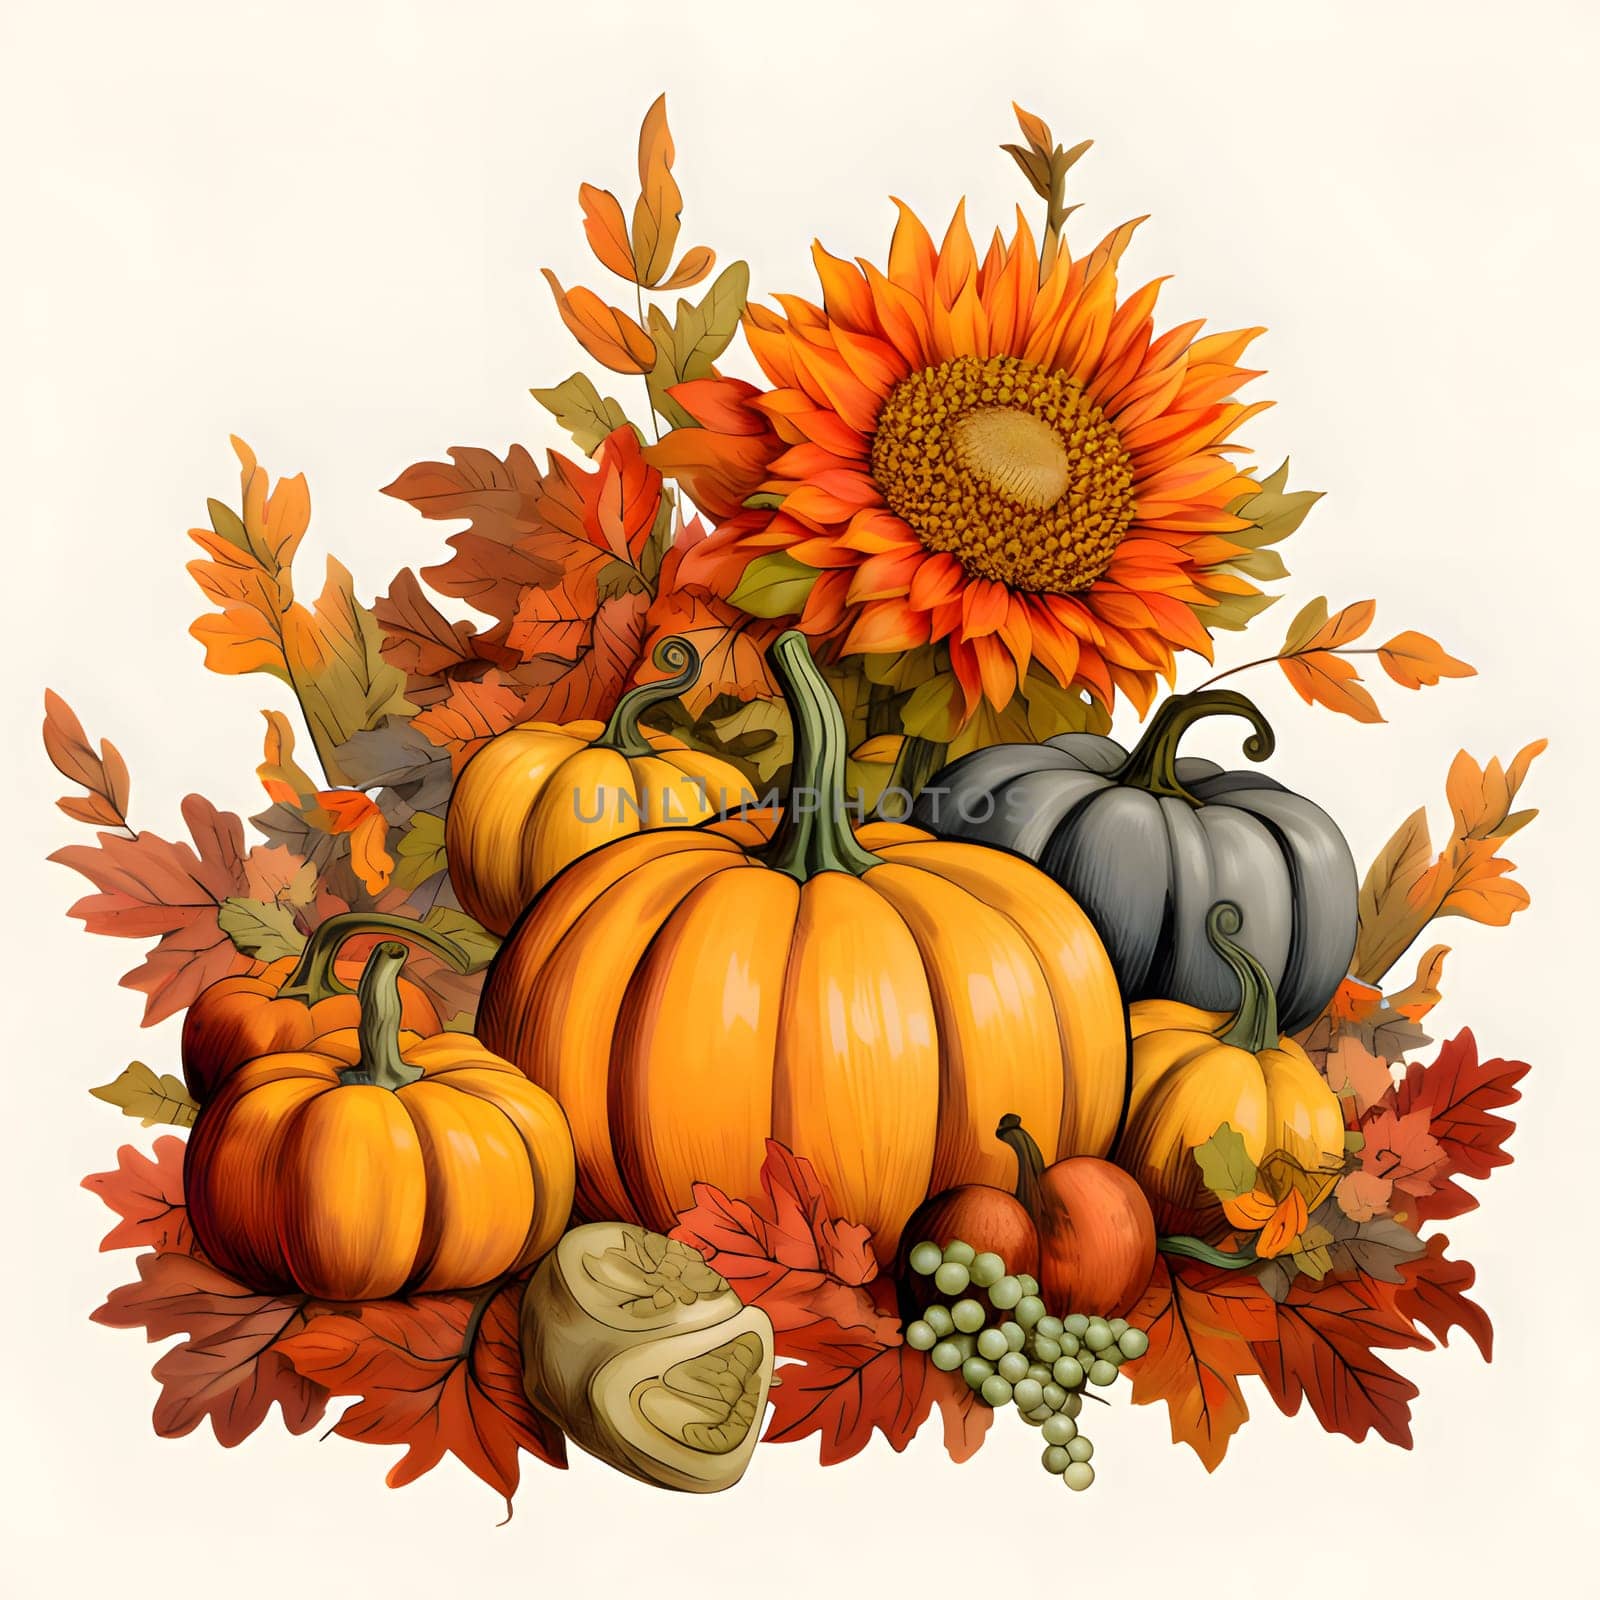 Illustration of elegantly arranged harvest from the field, sunflowers, grapes, pumpkins, autumn leaves. Pumpkin as a dish of thanksgiving for the harvest, picture on a white isolated background. An atmosphere of joy and celebration.